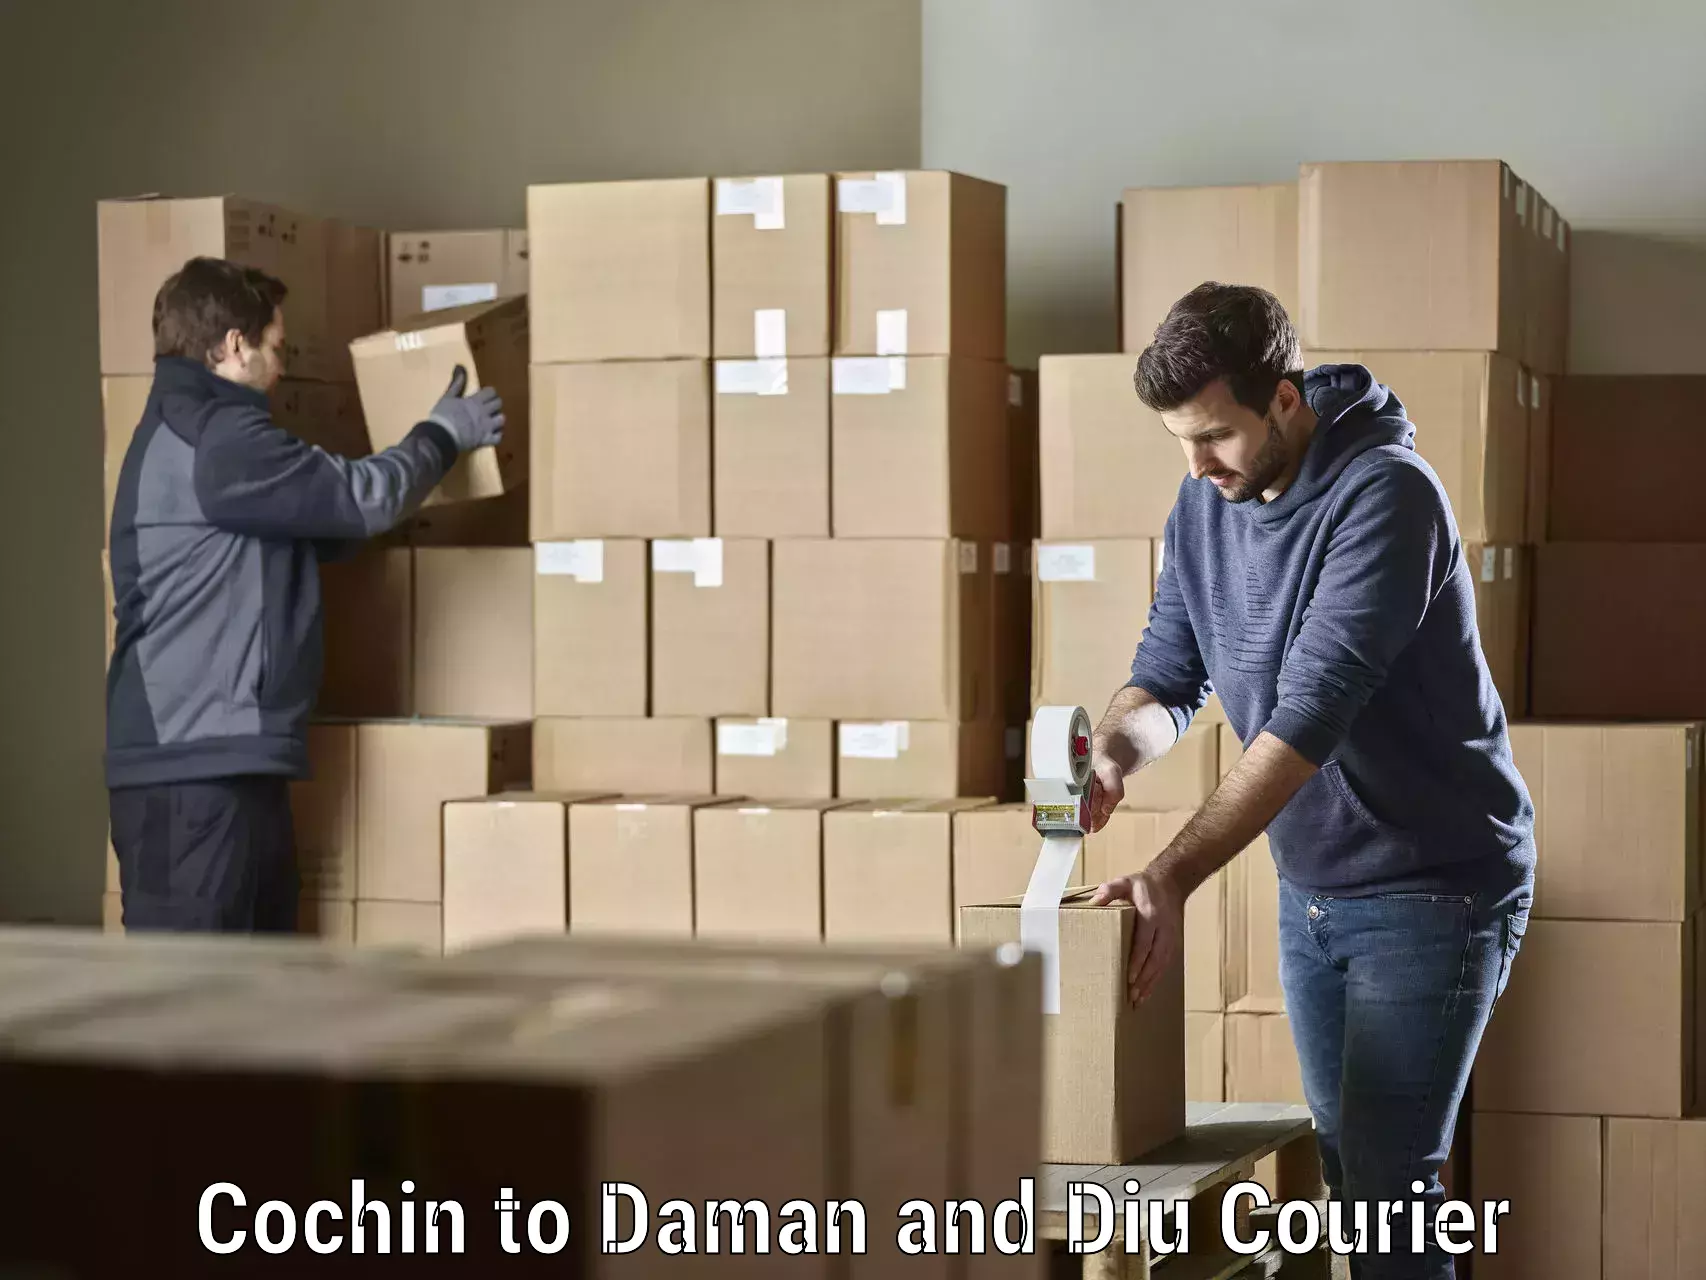 Customer-focused courier Cochin to Daman and Diu